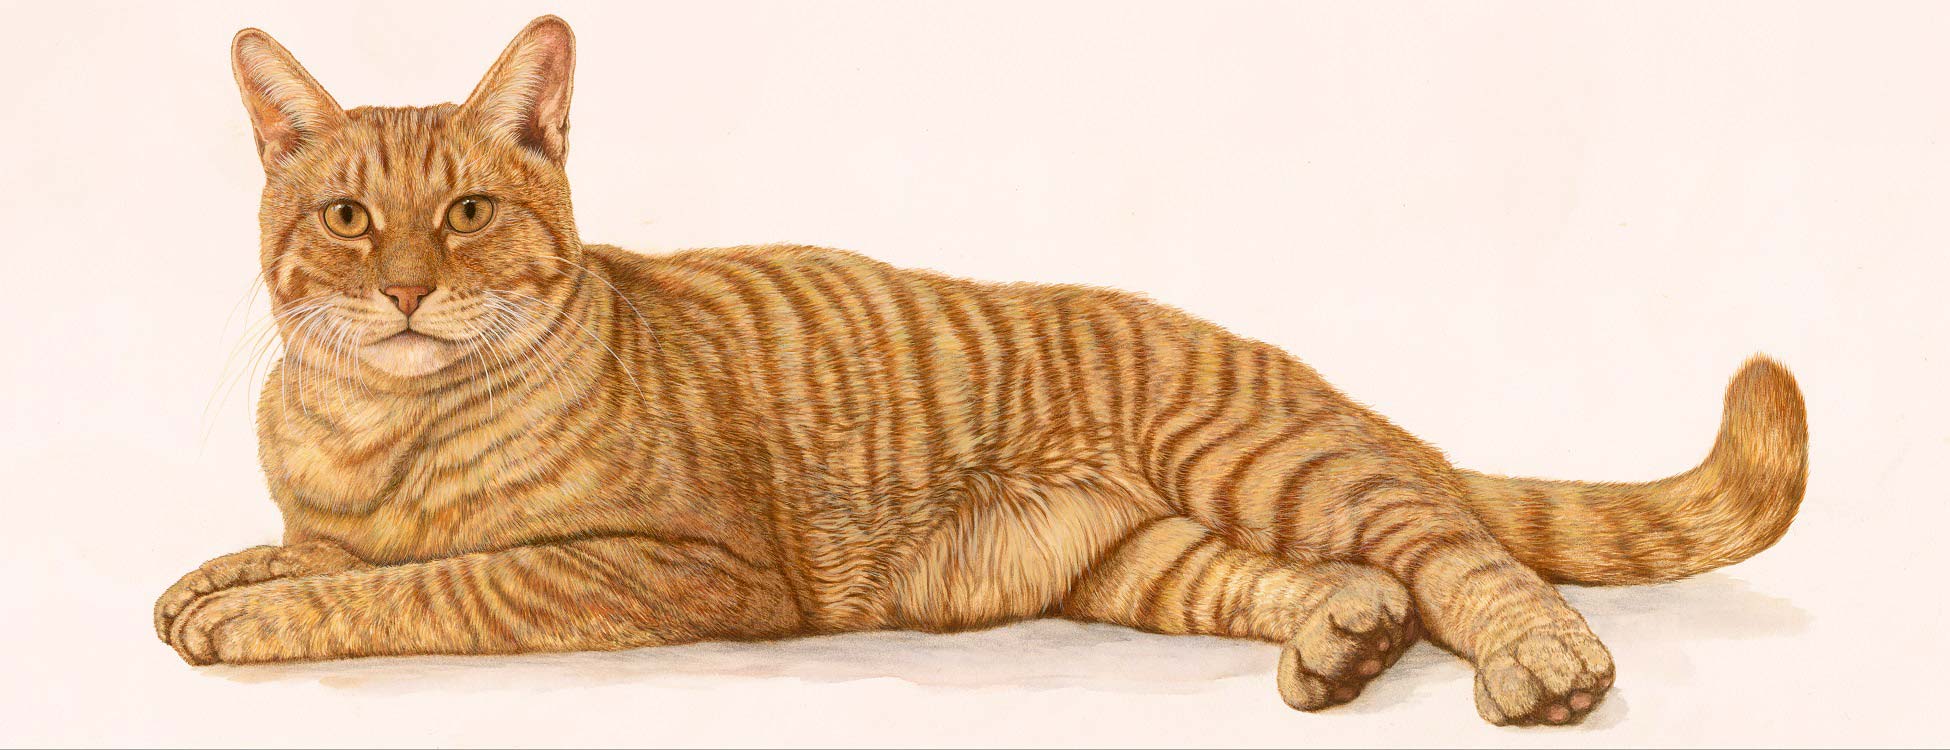 Gold Tabby Cat Painting by Artist Jacquie Vaux